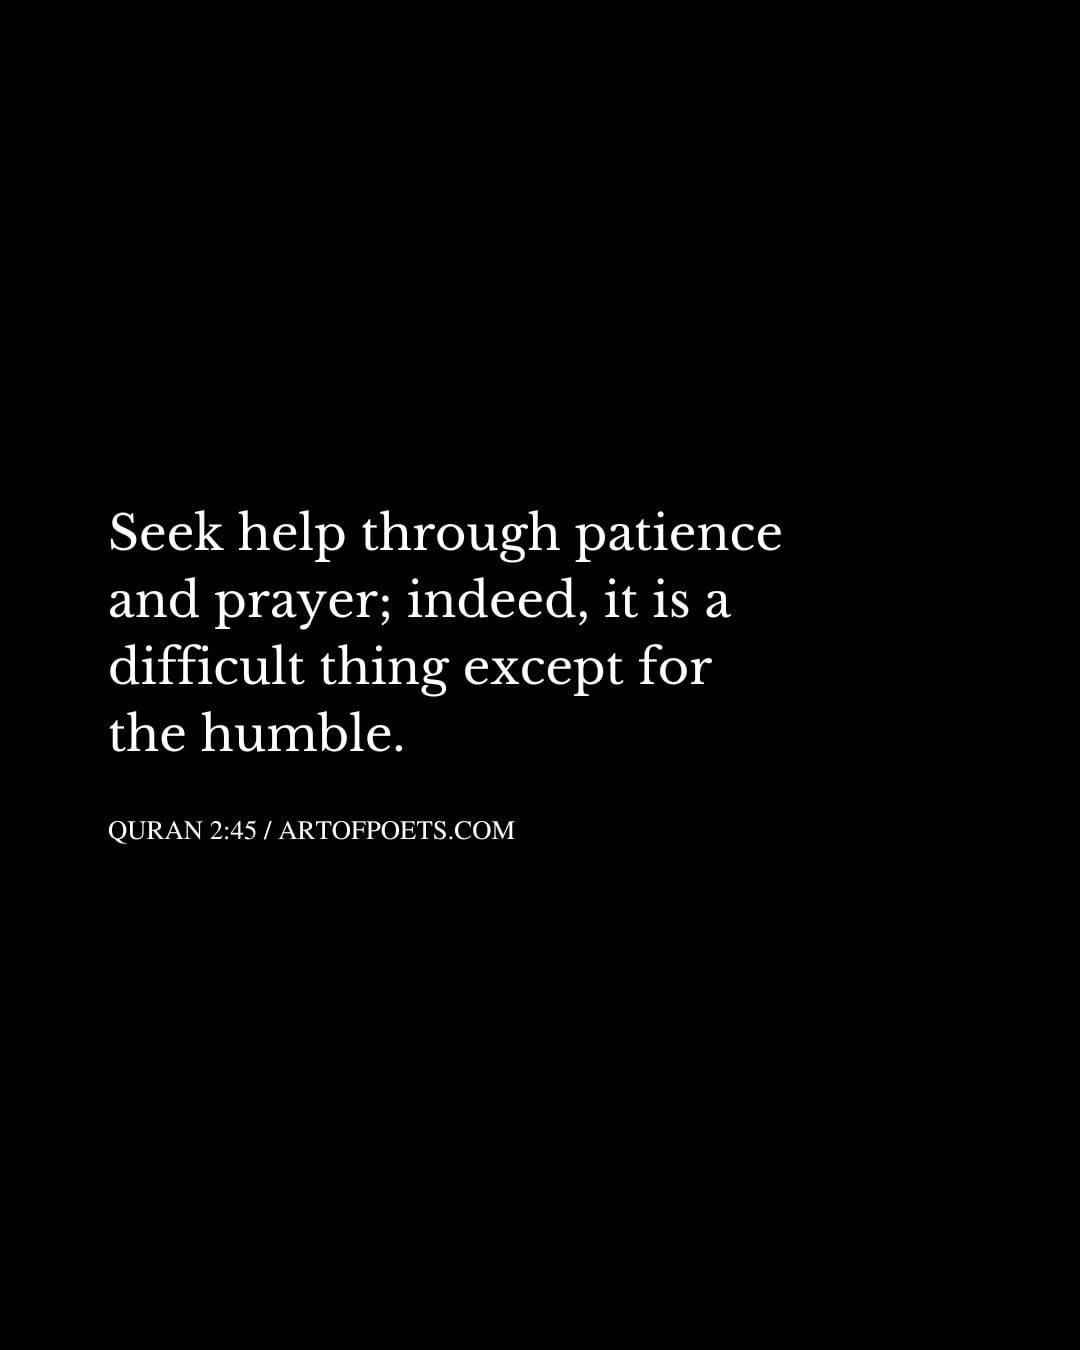 Seek help through patience and prayer indeed it is a difficult thing except for the humble